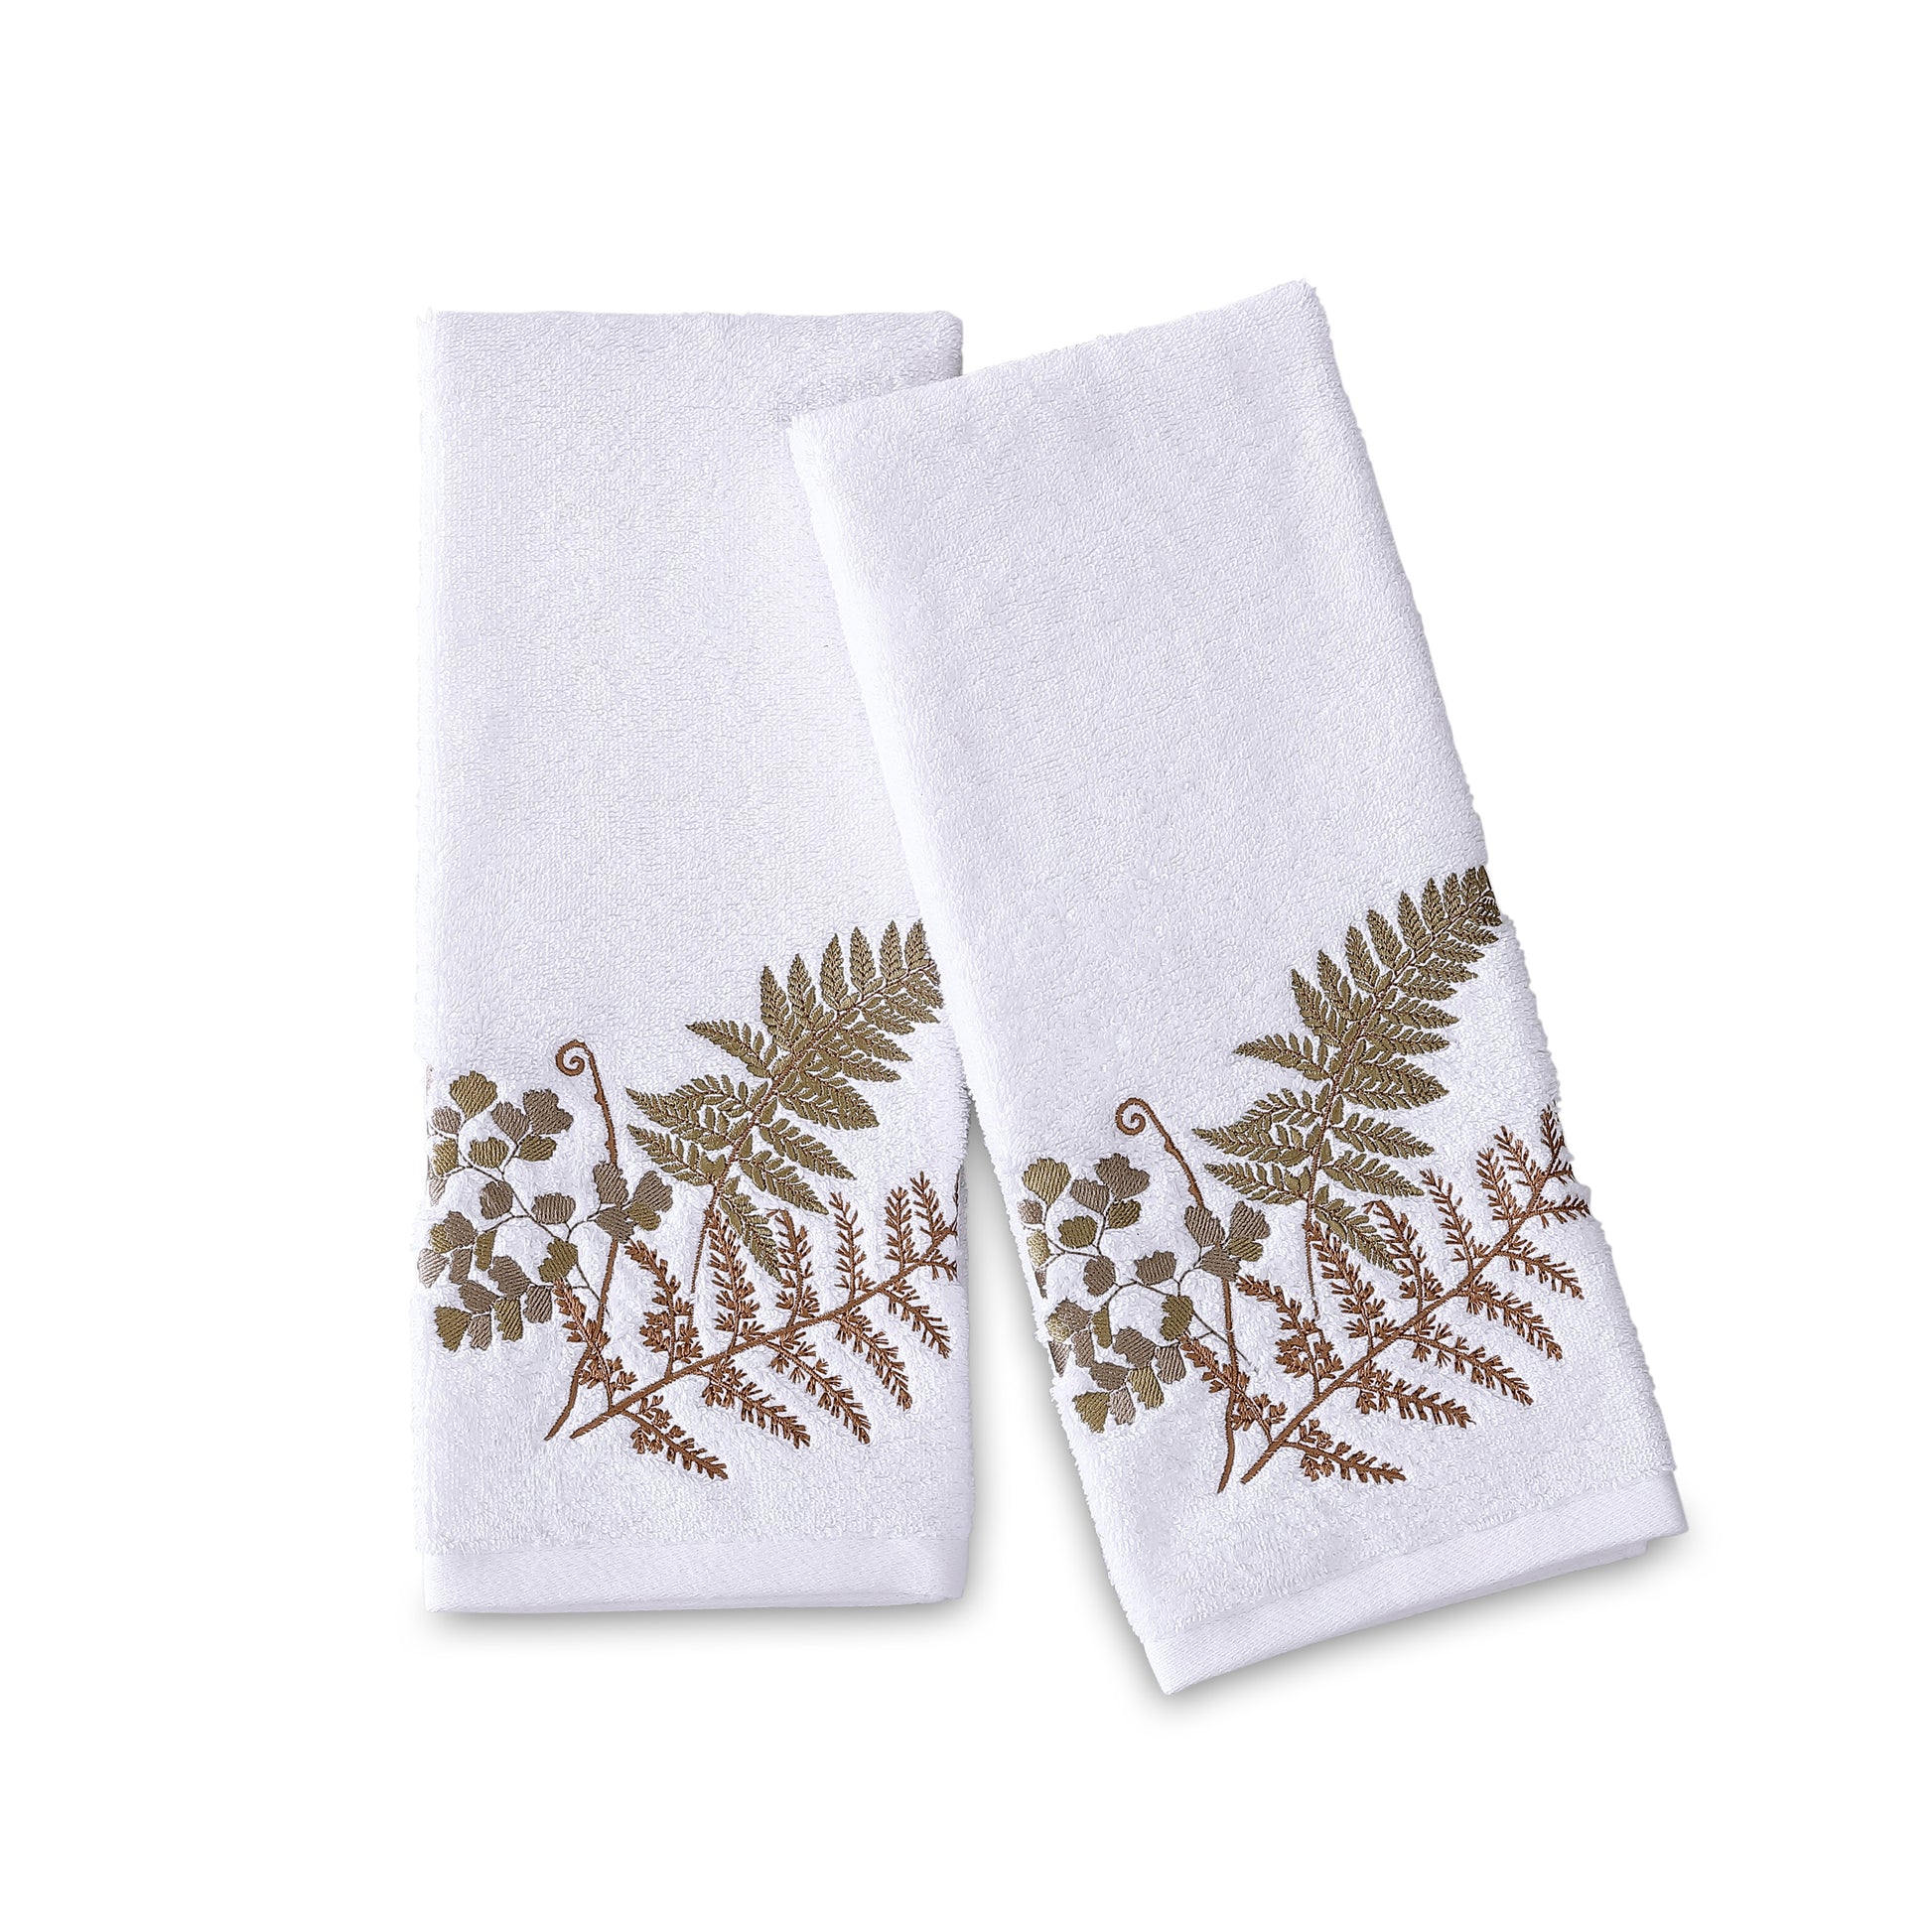 Michael Aram Orchid Blossoms Embroidered Hand Towels, Set of 2